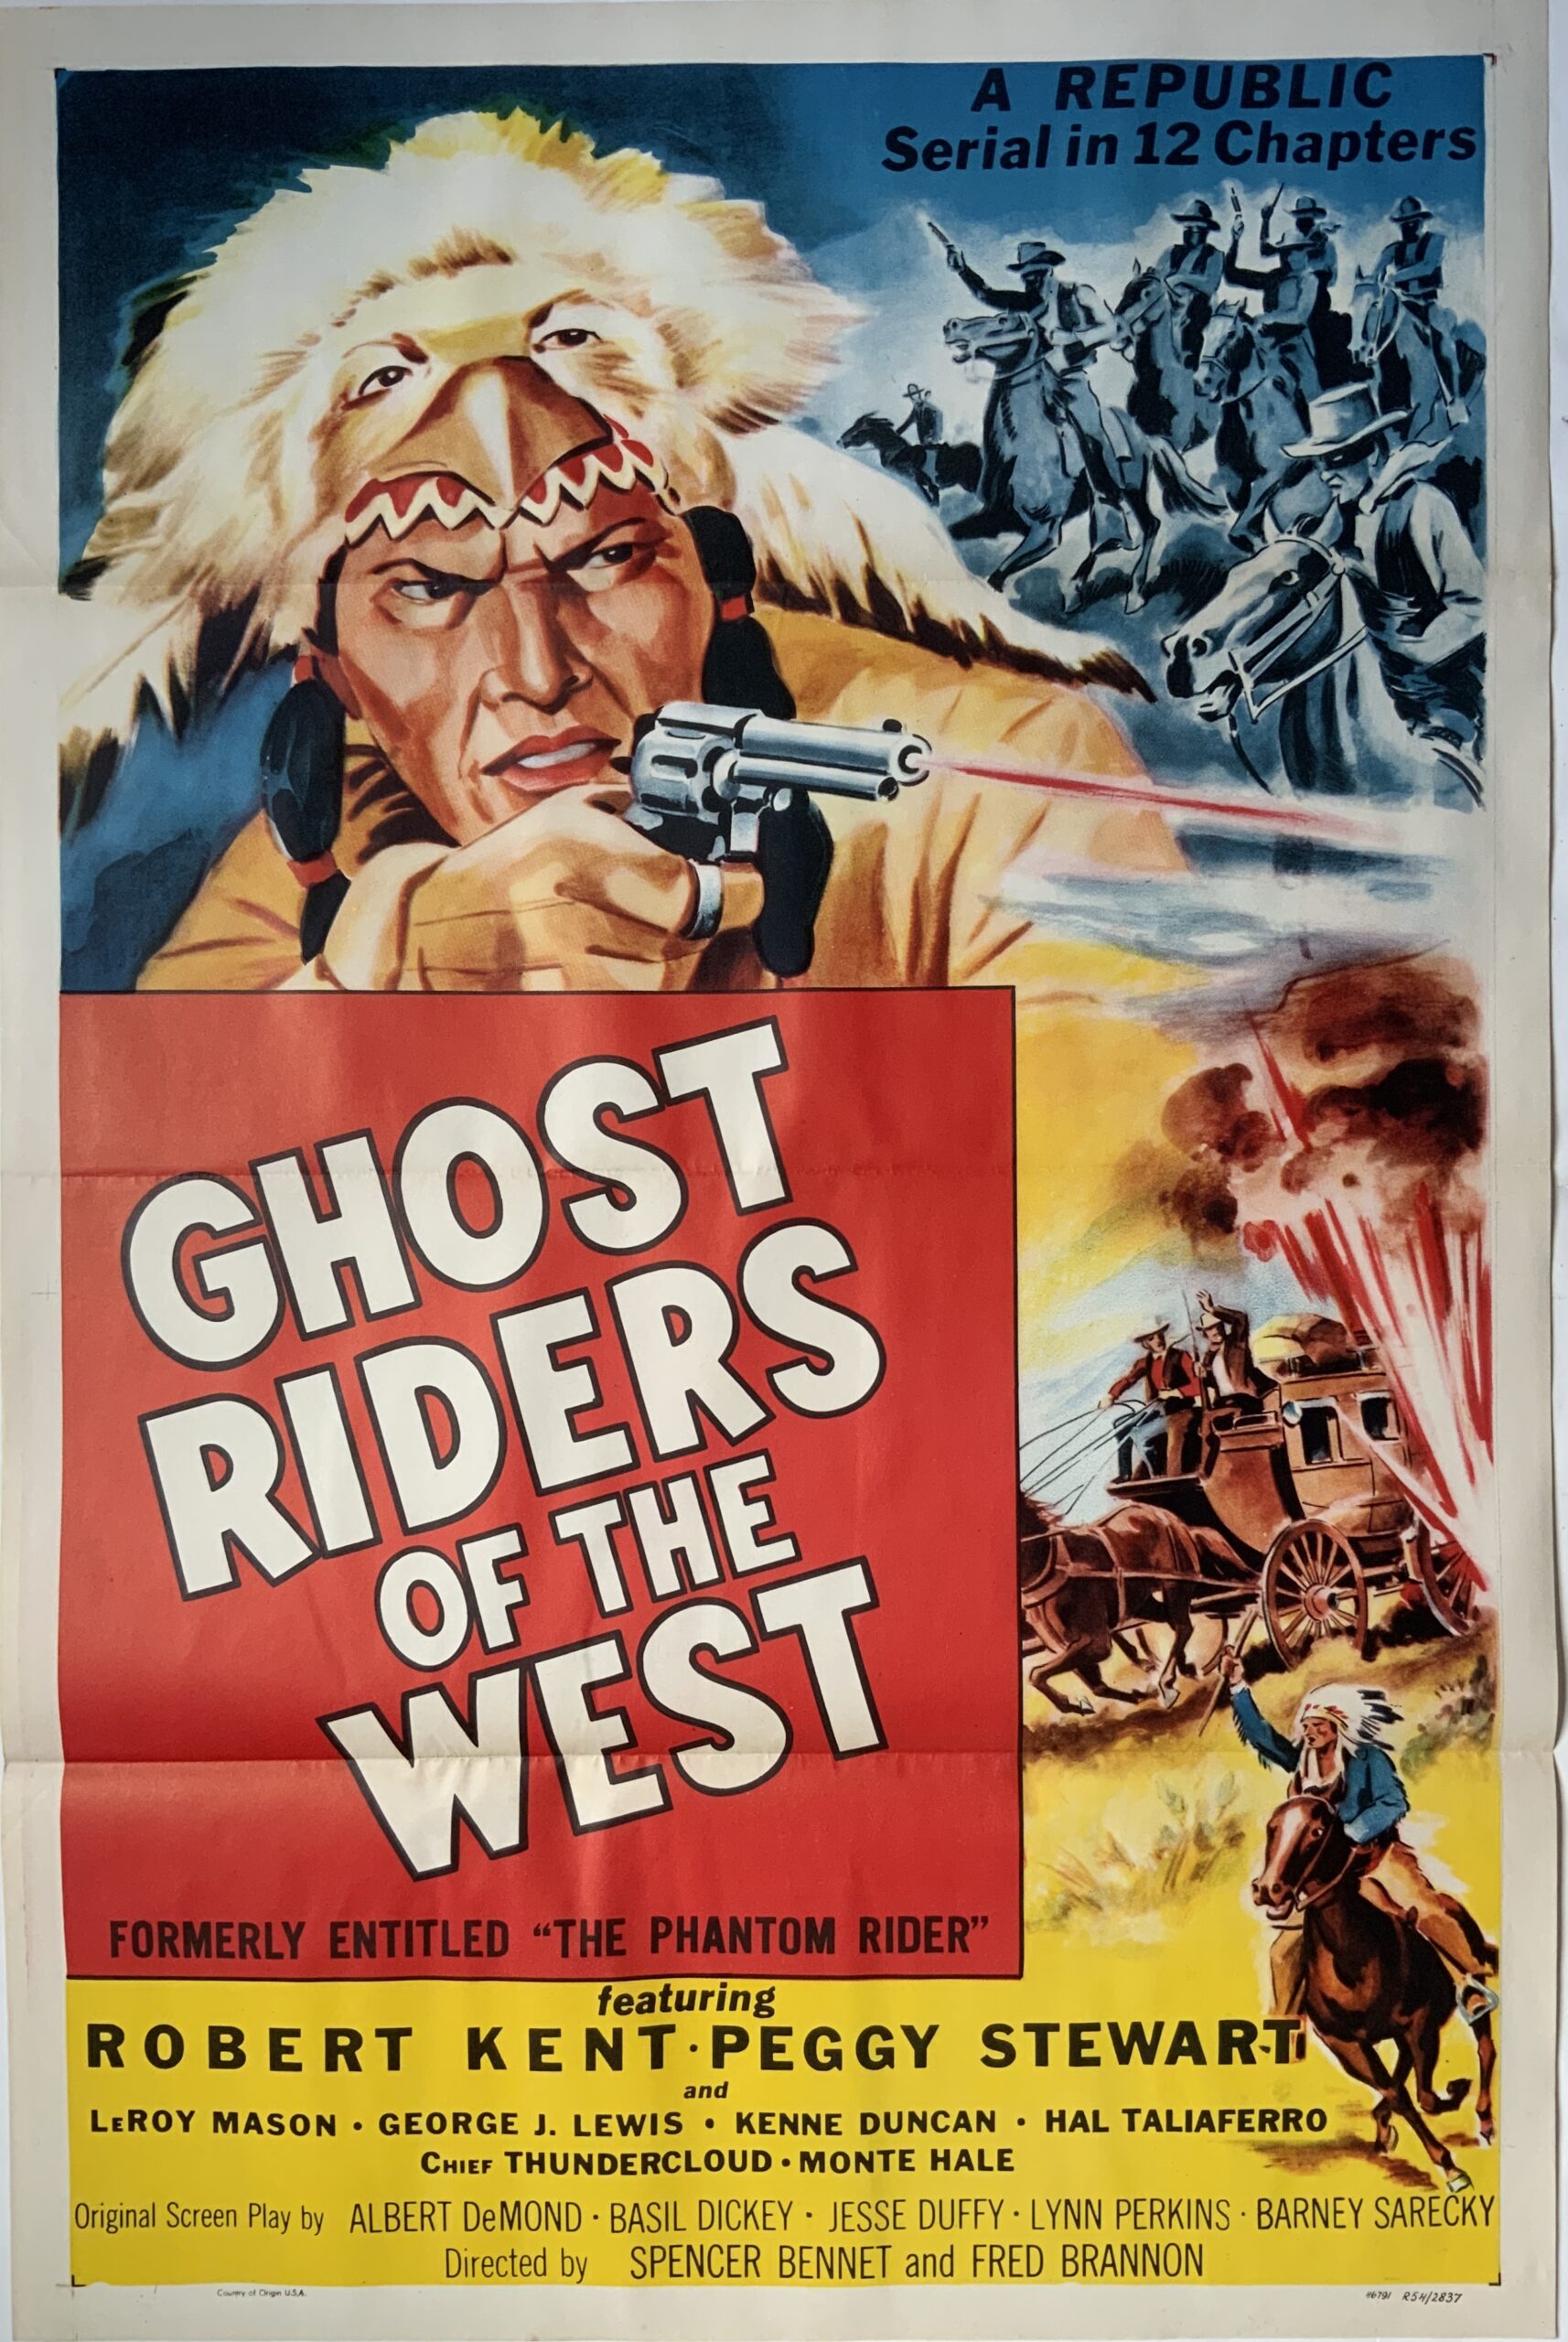 M628	GHOST RIDERS OF THE WEST 1954 ORIGINAL POSER 27x40”